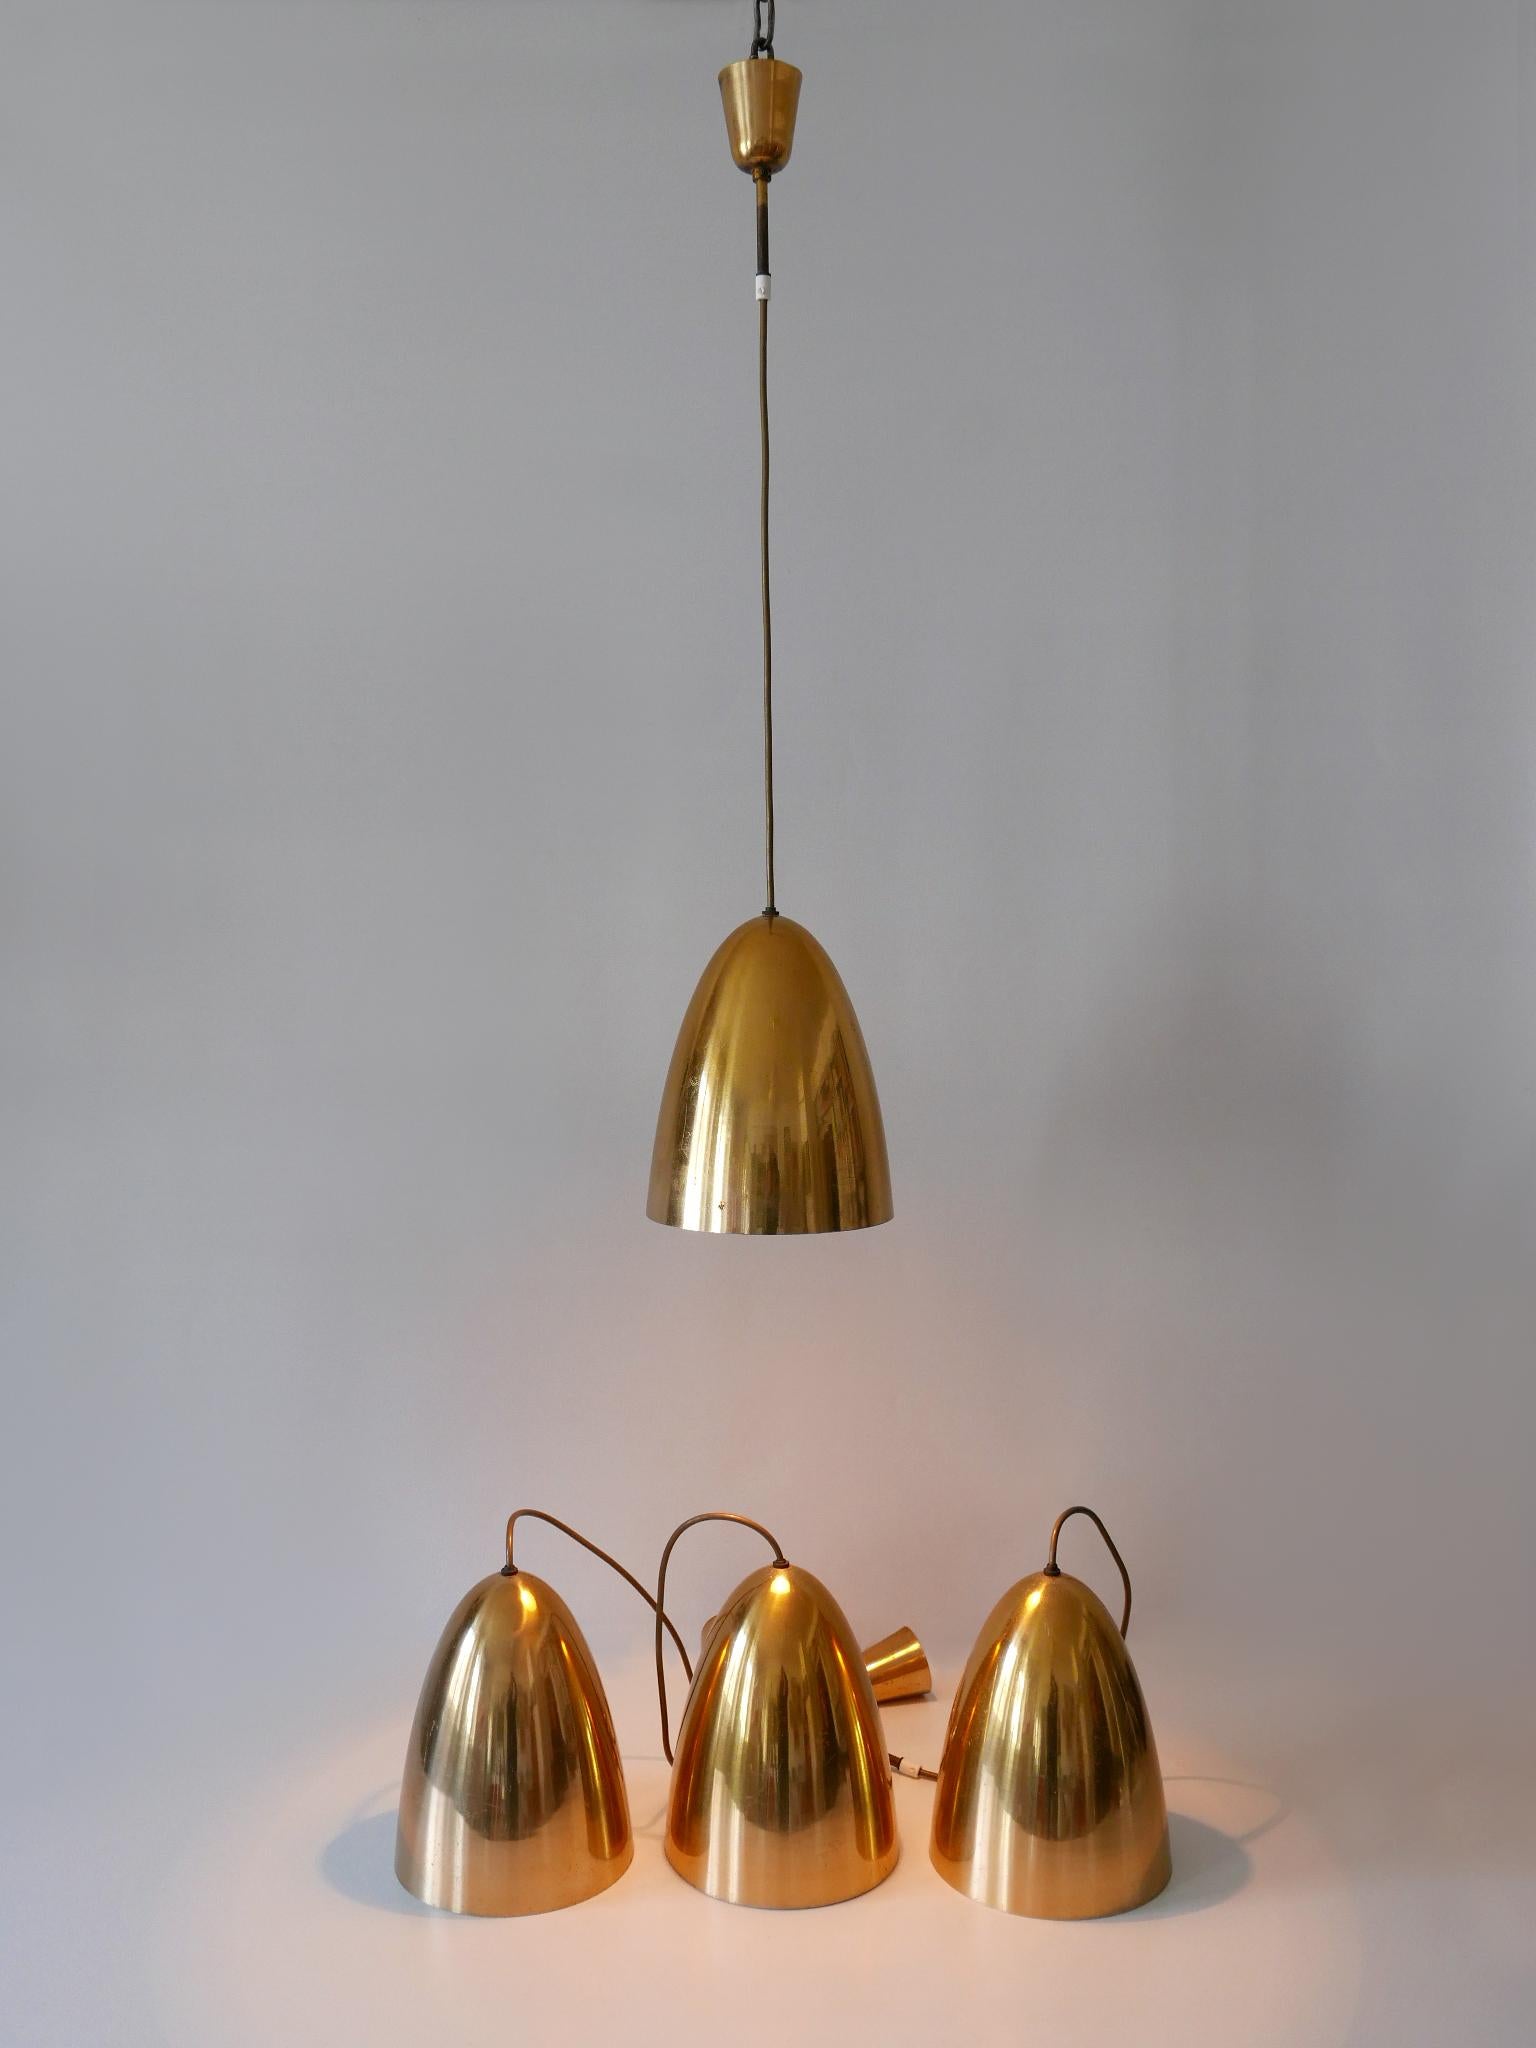 Elegant and highly decorative Mid-Century Modern pendant lamps or hanging lights. Designed & manufactured in Germany, 1950s.

Price per item. Four identical pendant lamps available

Executed in gilt / gold anodized aluminium, each pendant lamp is